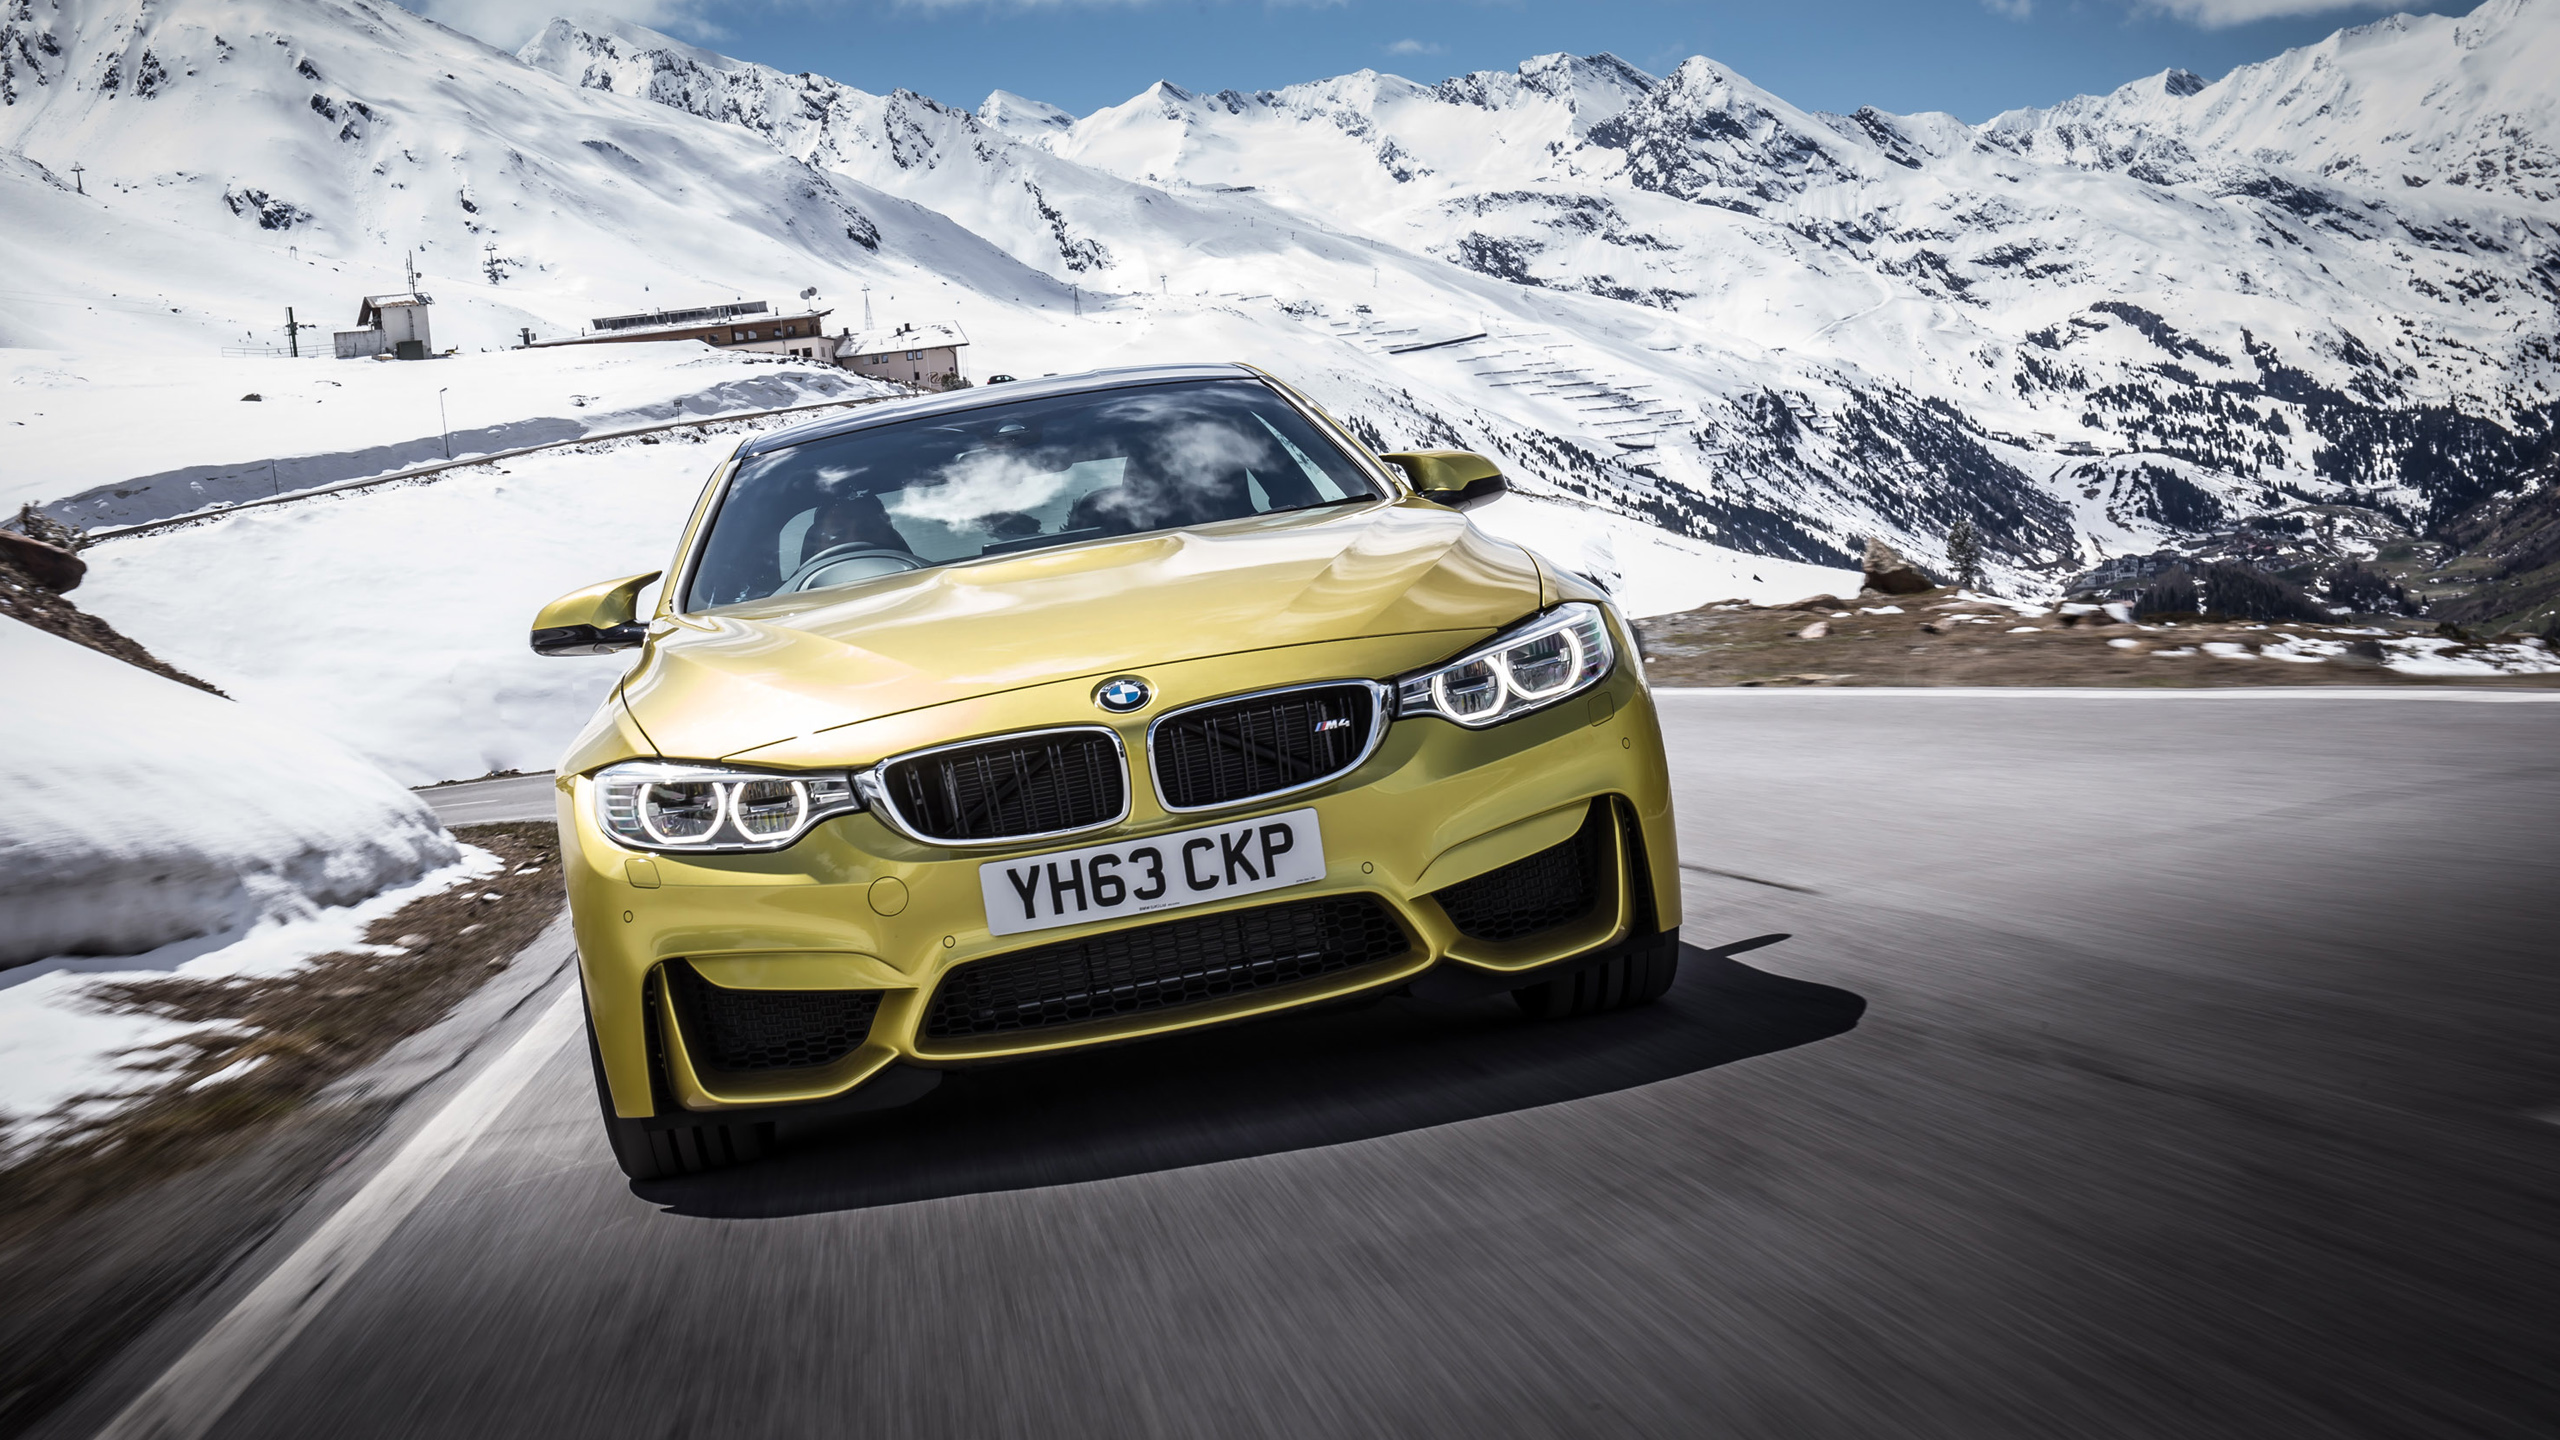 Bmw M4 Coupe By HDcarwallpaper